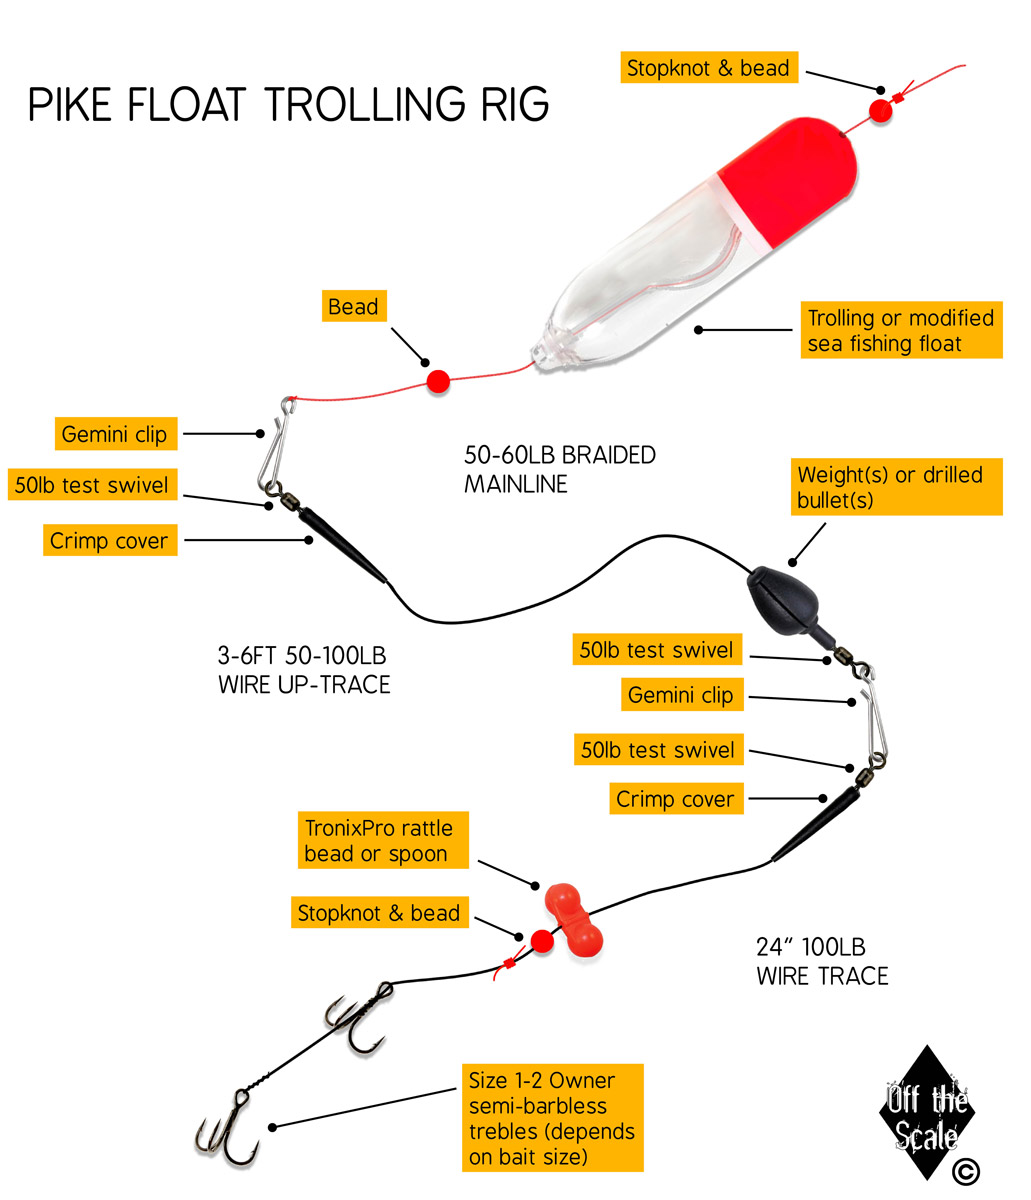 Set up a float trolling rig for pike - Off the Scale magazine